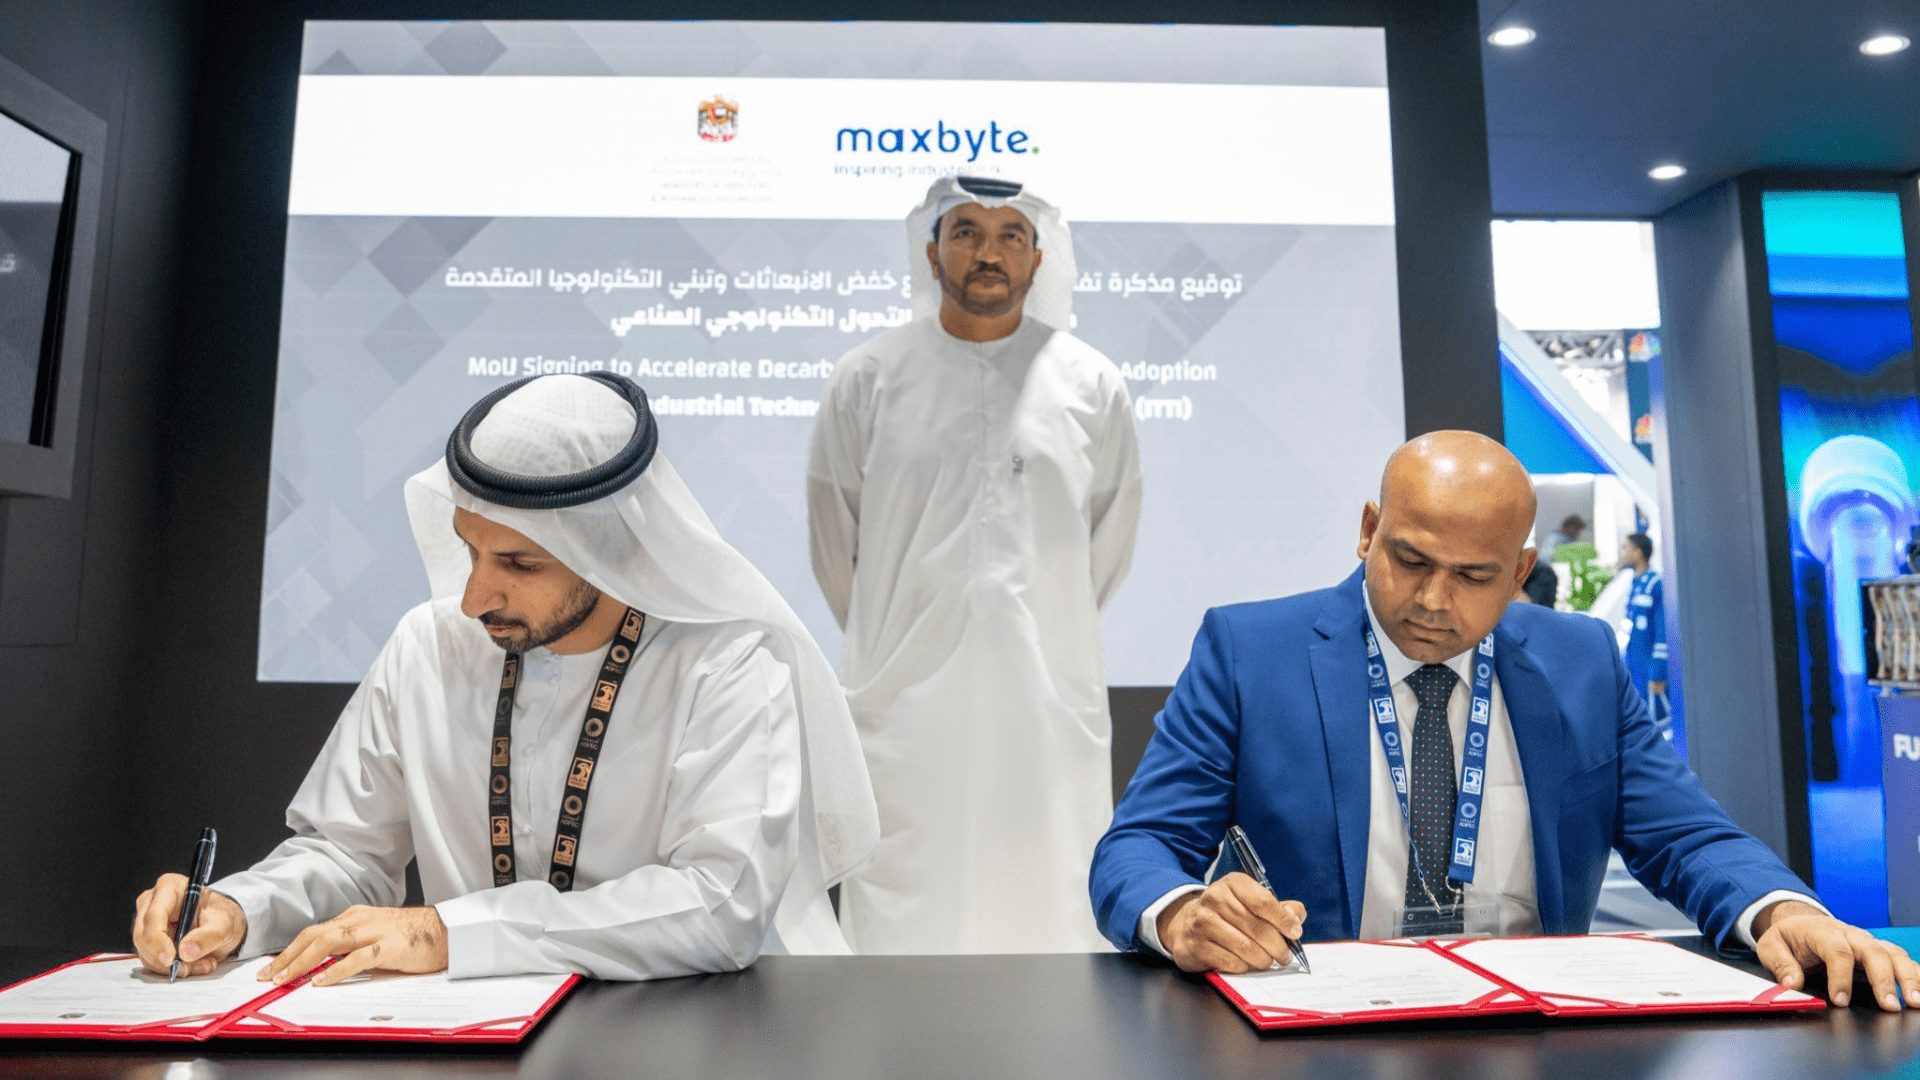 ADIPEC Exhibition and Conference, Ministry of Industry & Advanced Technology signs MoU with Maxbyte Technologies